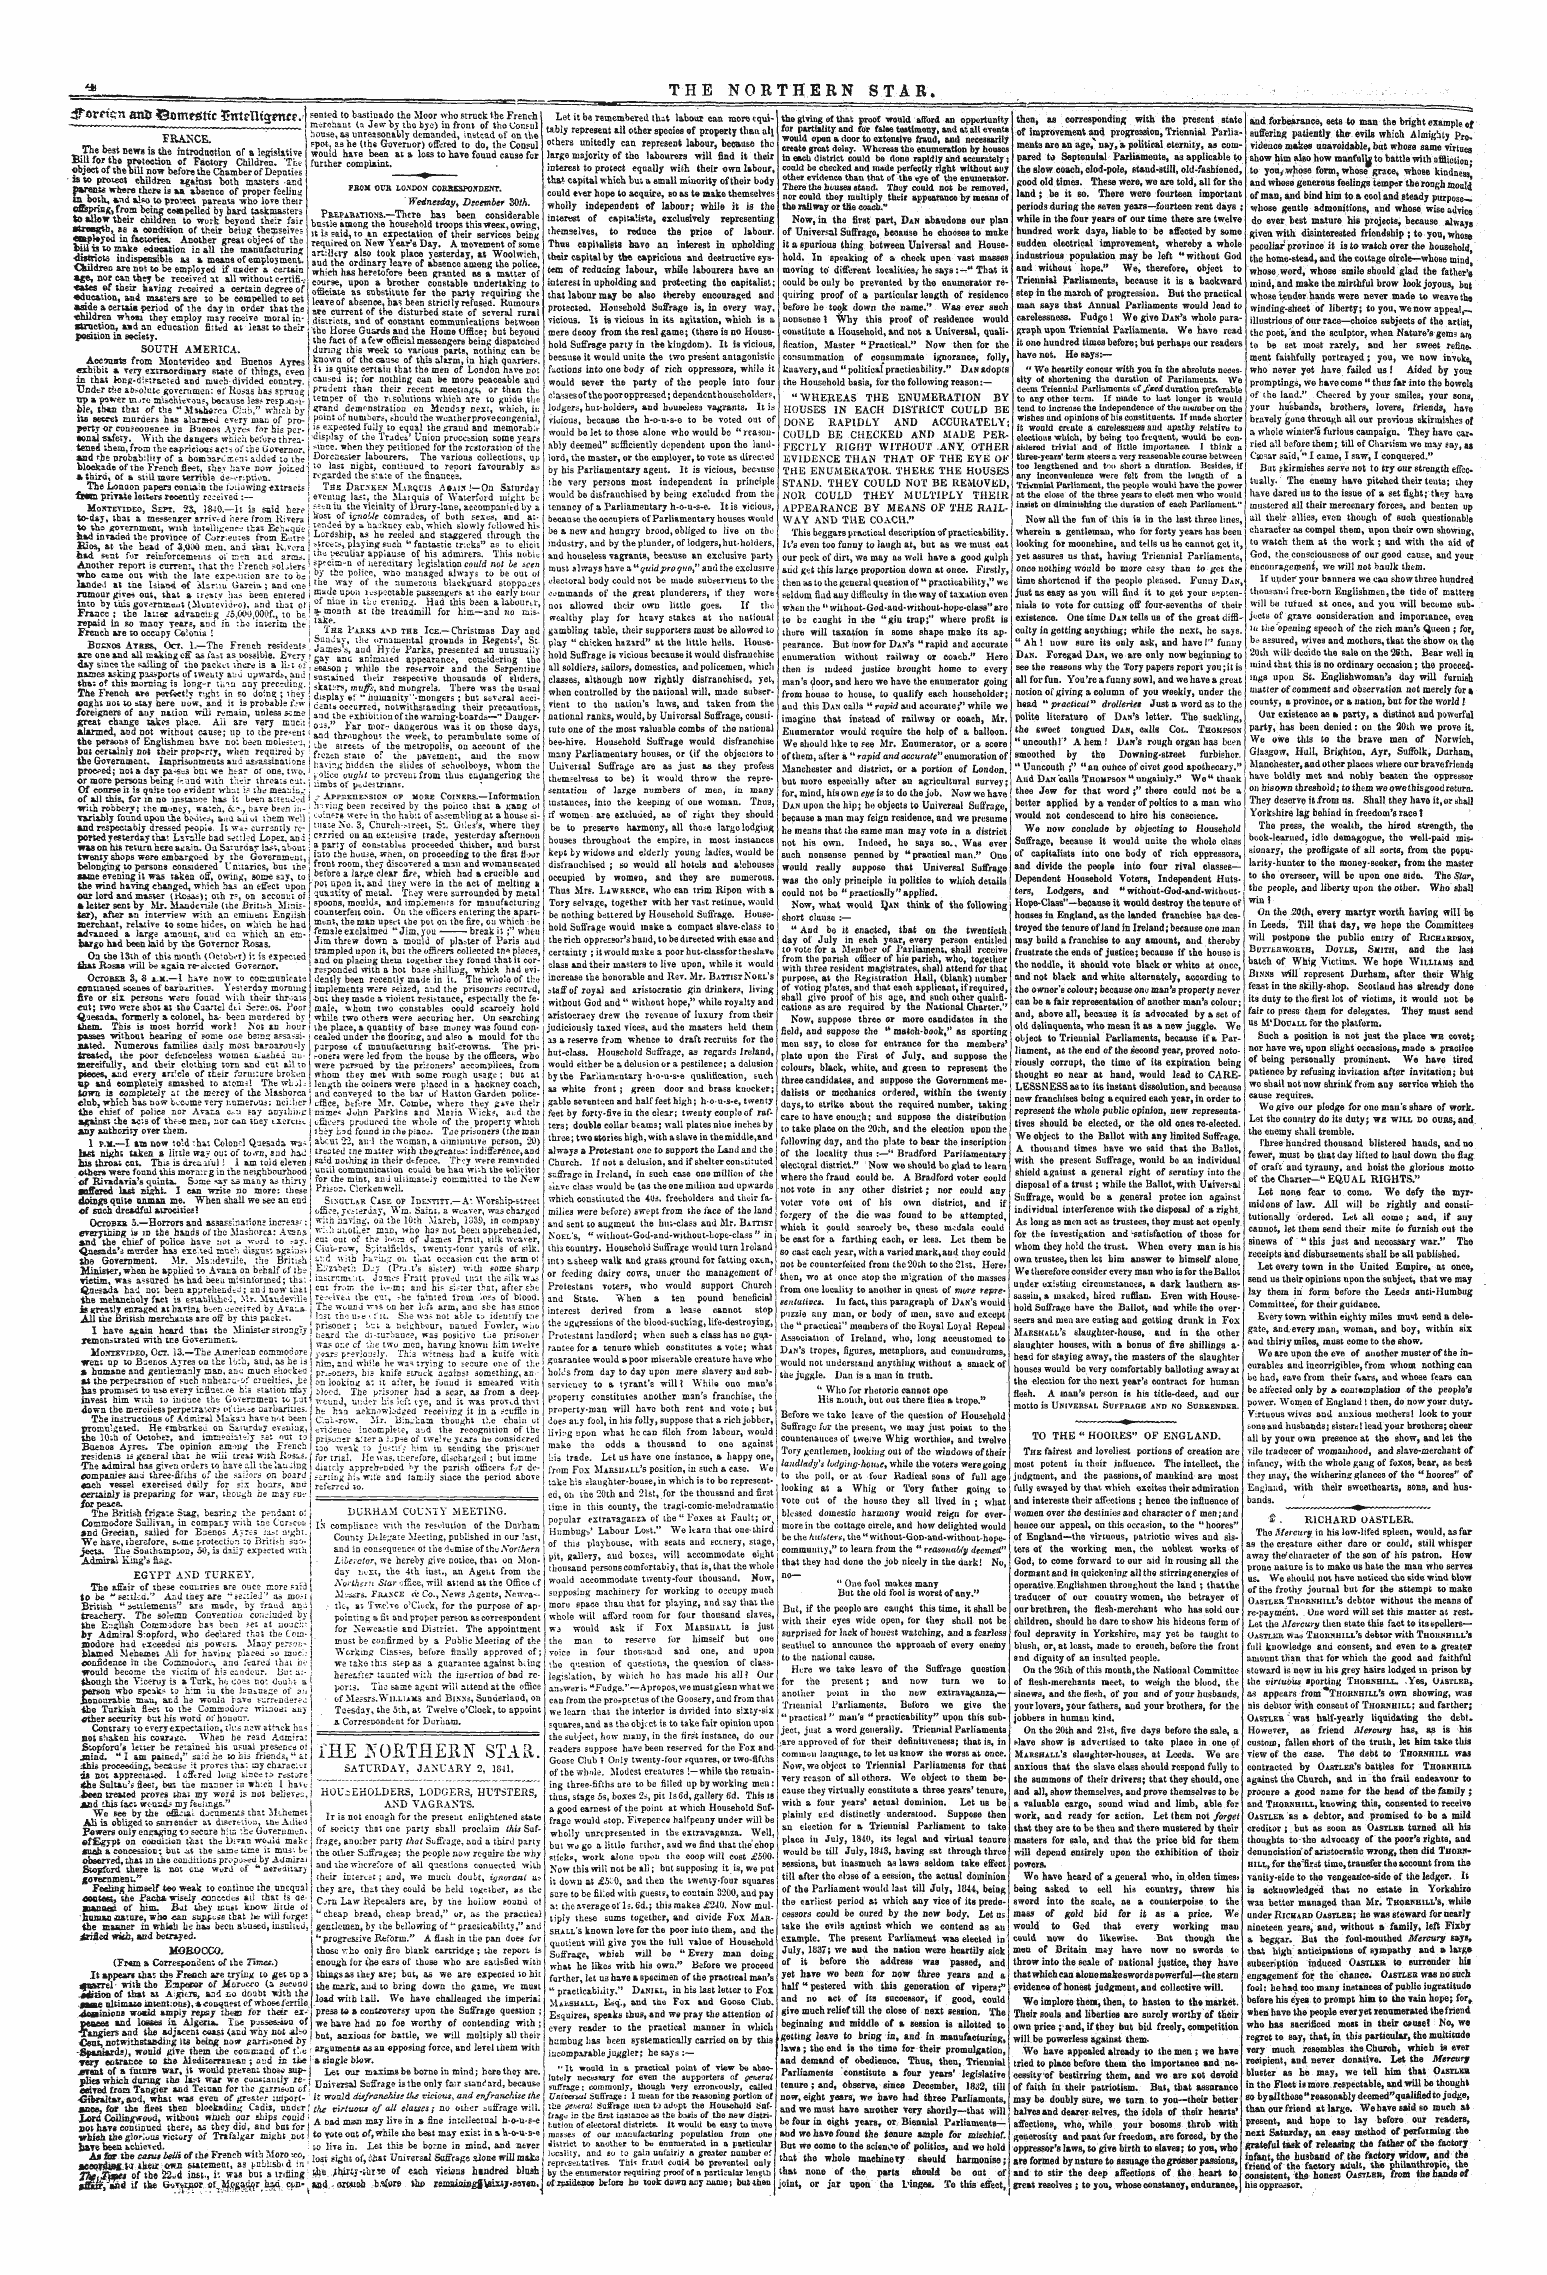 Northern Star (1837-1852): jS F Y, 1st edition - Fhe Southern Star. Saturday, January 2, 1841.